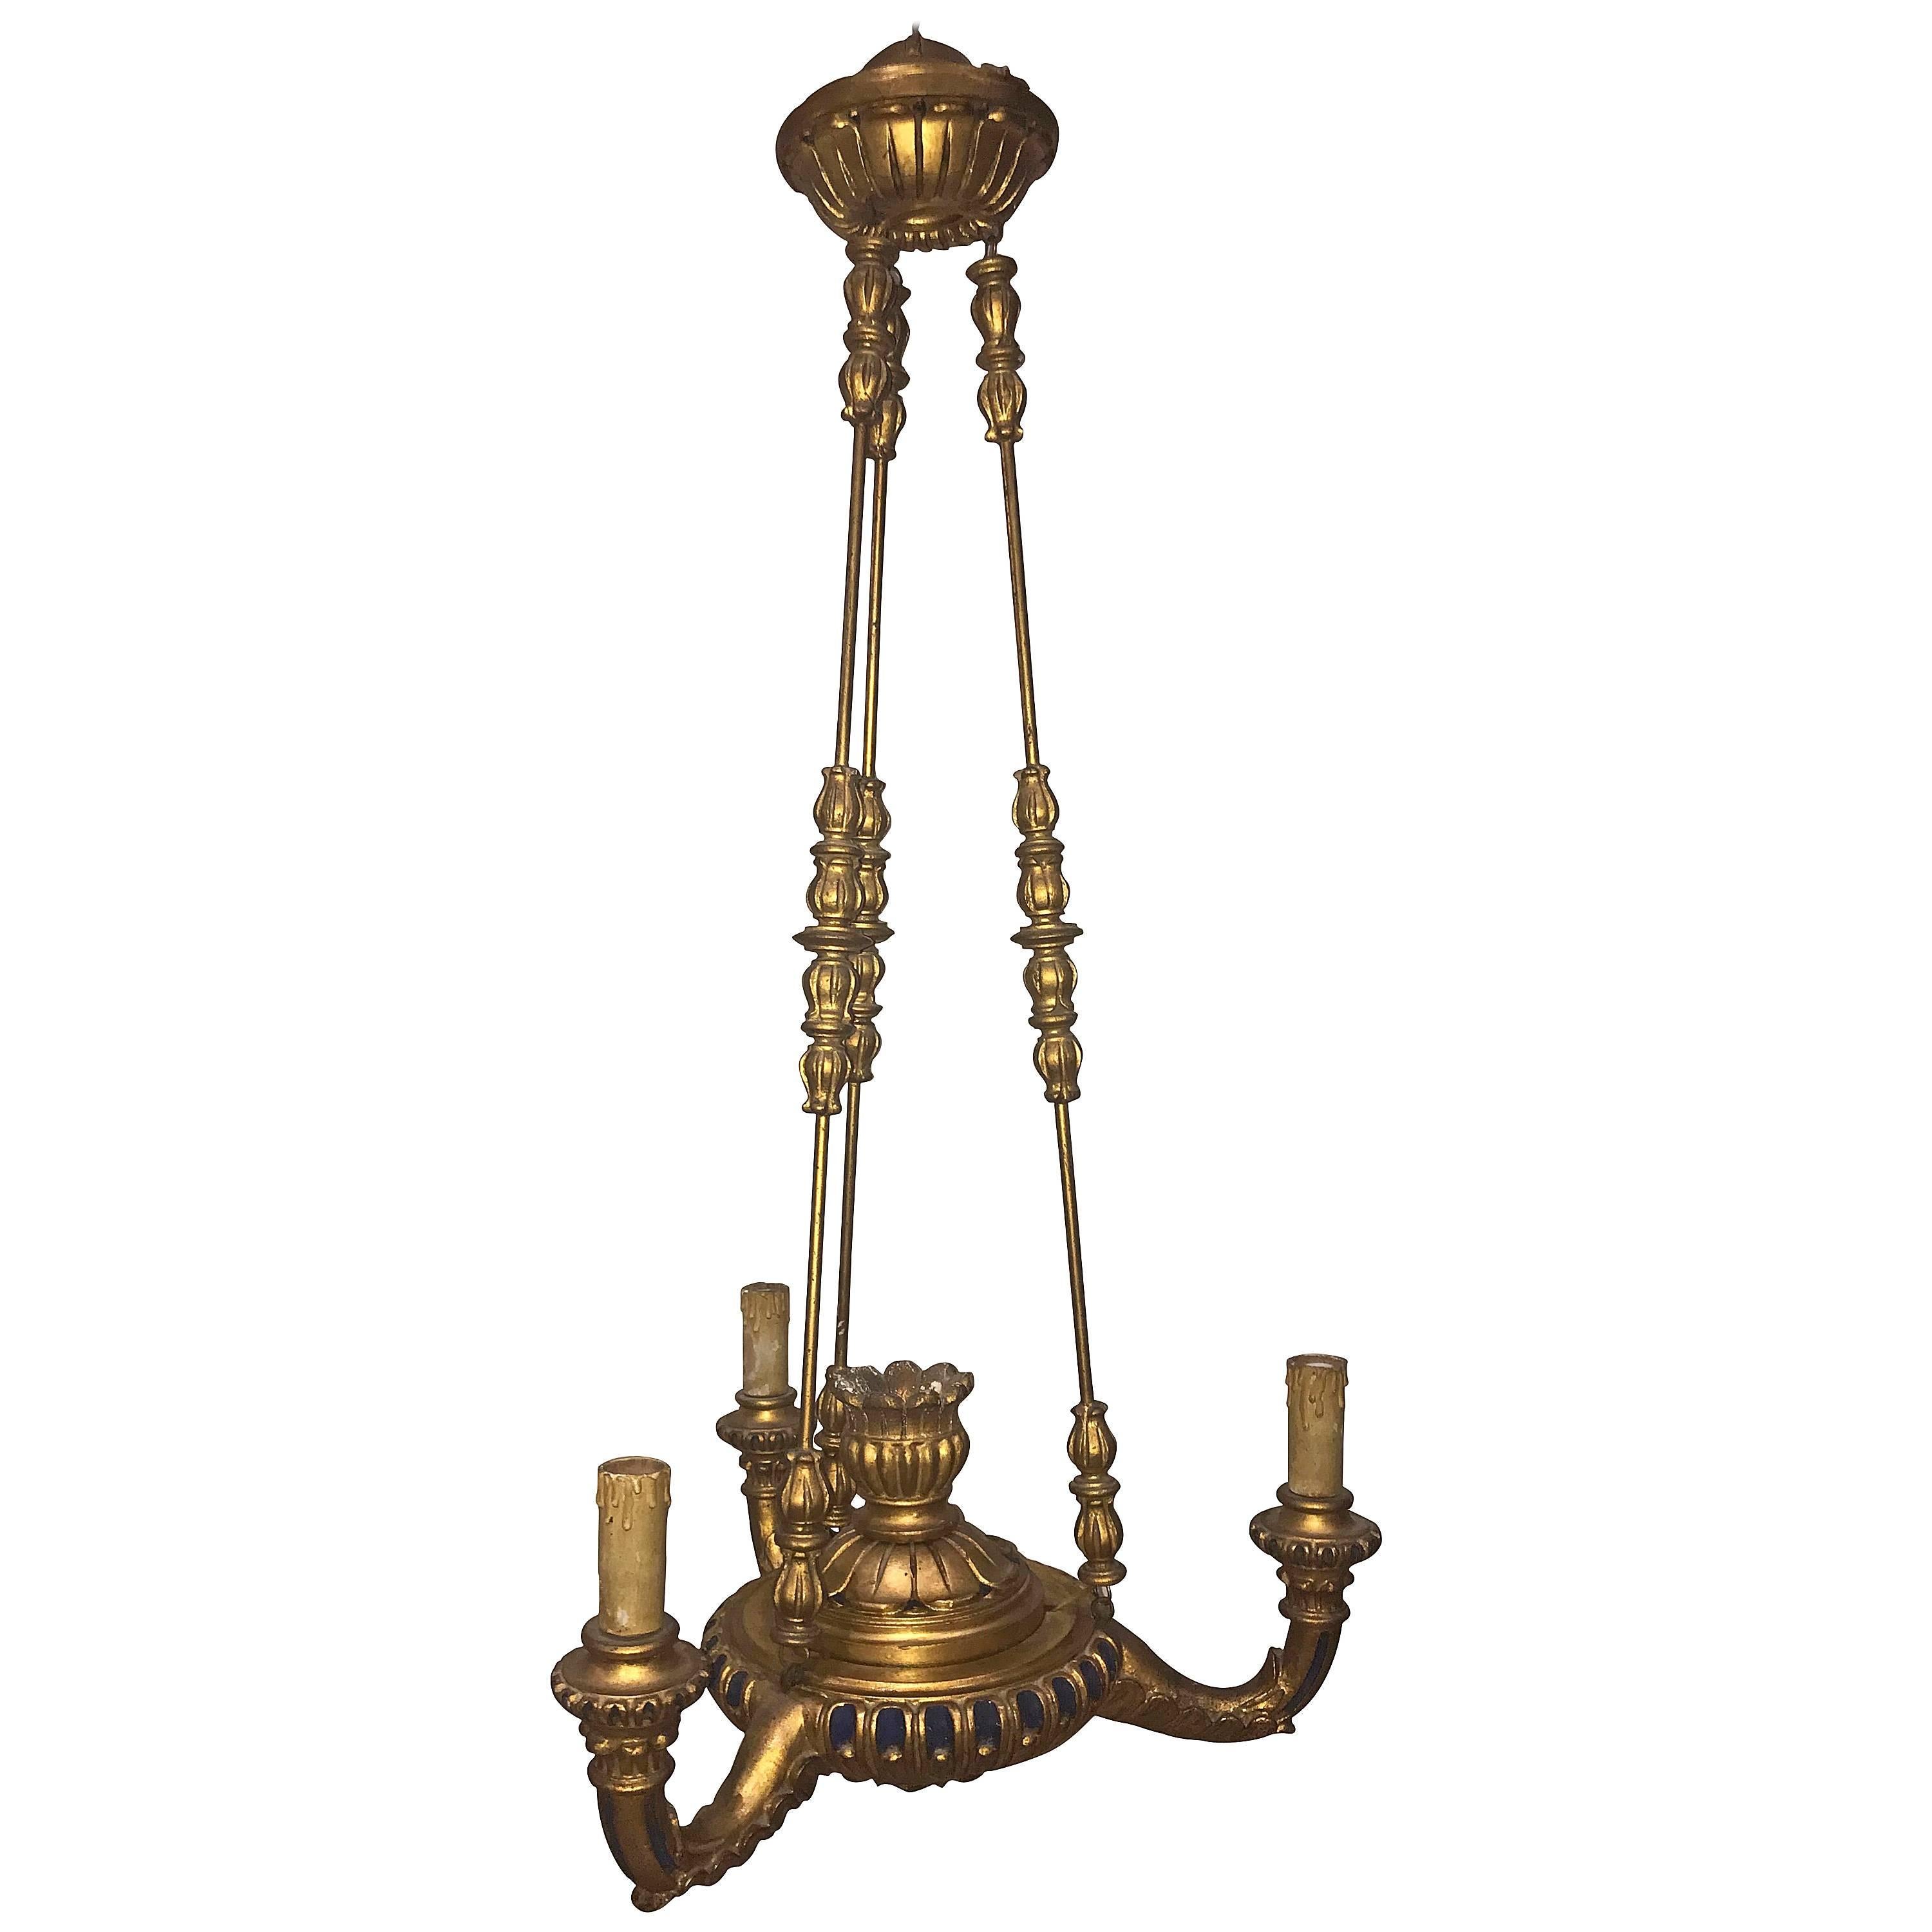 Carved Giltwood Tuscan Chandelier, 19th Century